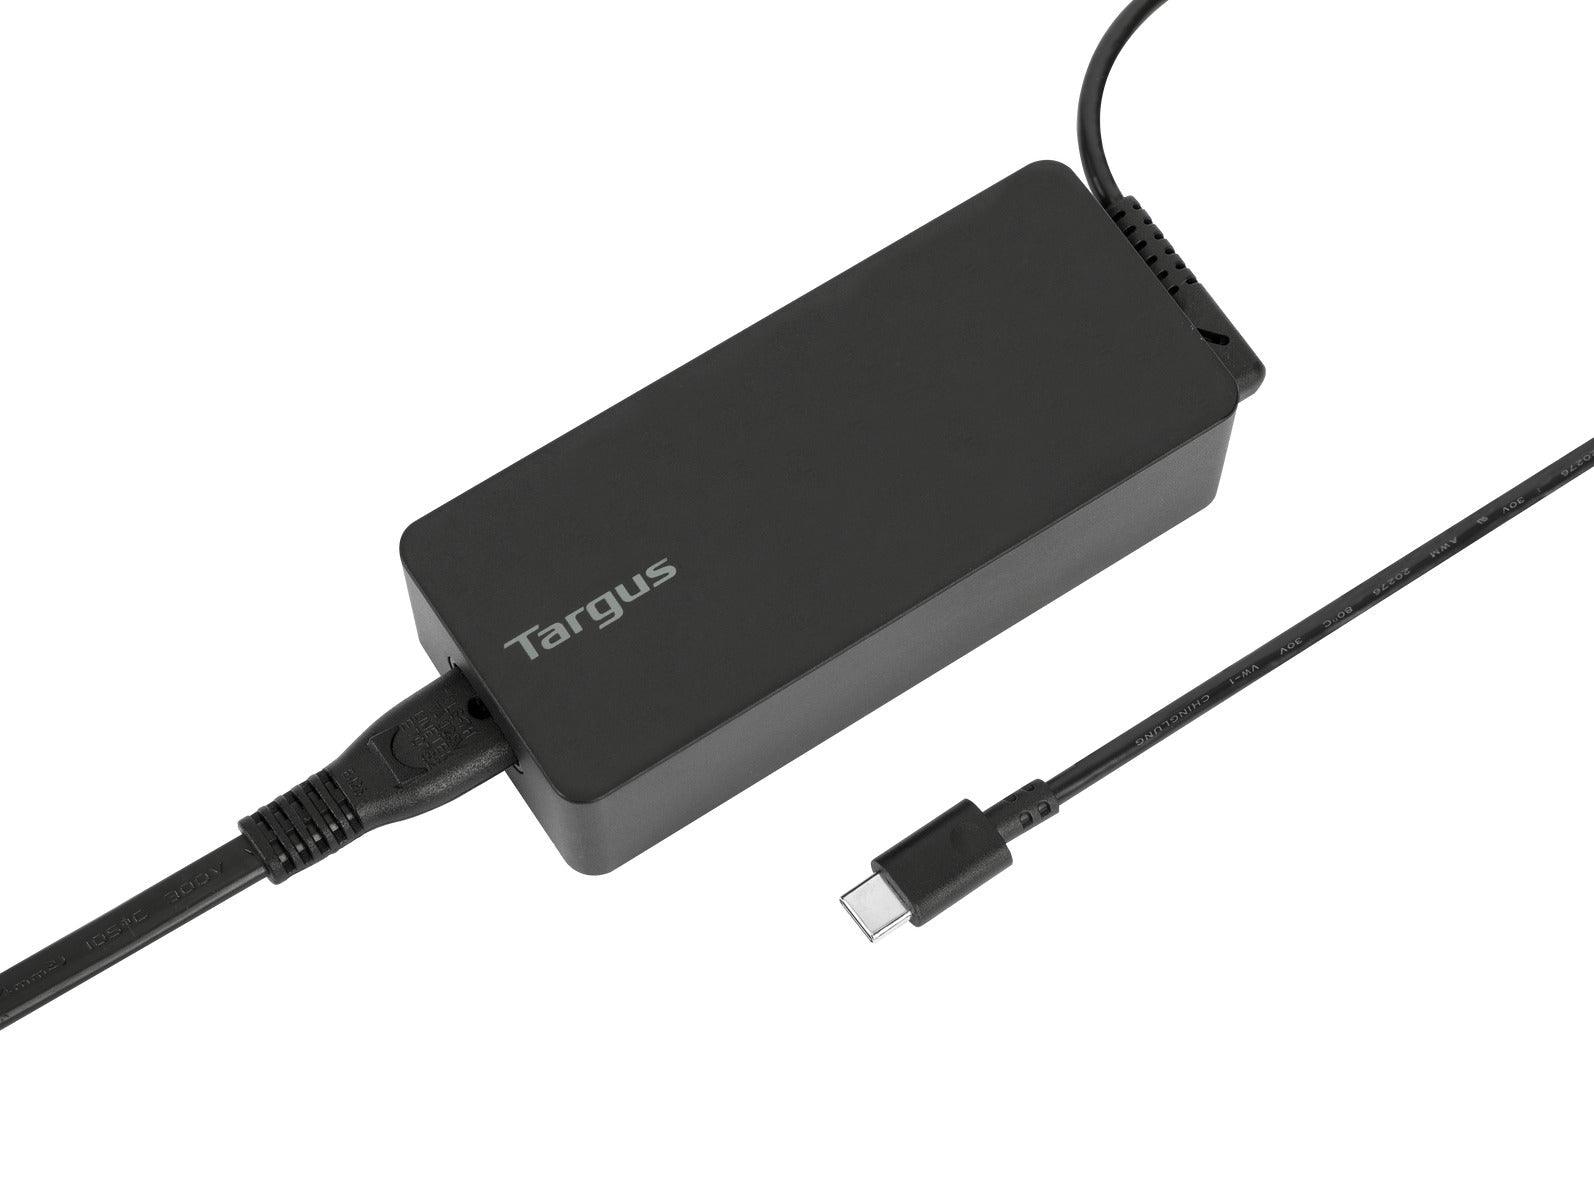 Targus 100W USB-C Charger - Marknet Technology